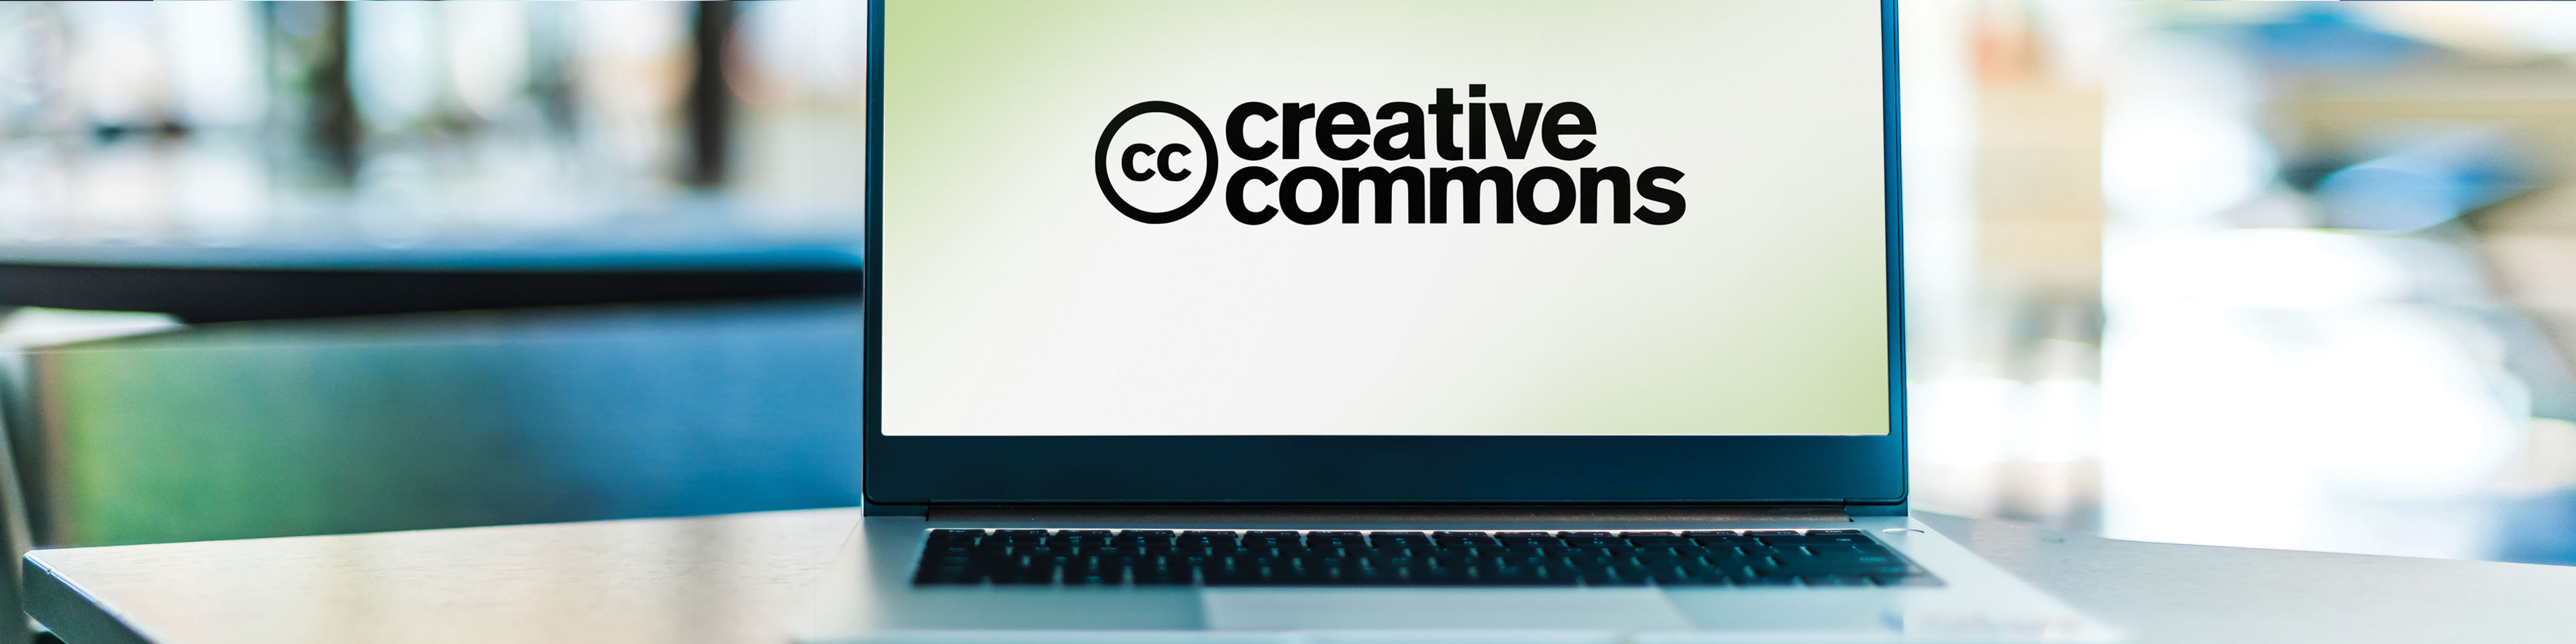 Laptop sitting on a table displaying the Creative Commons logo